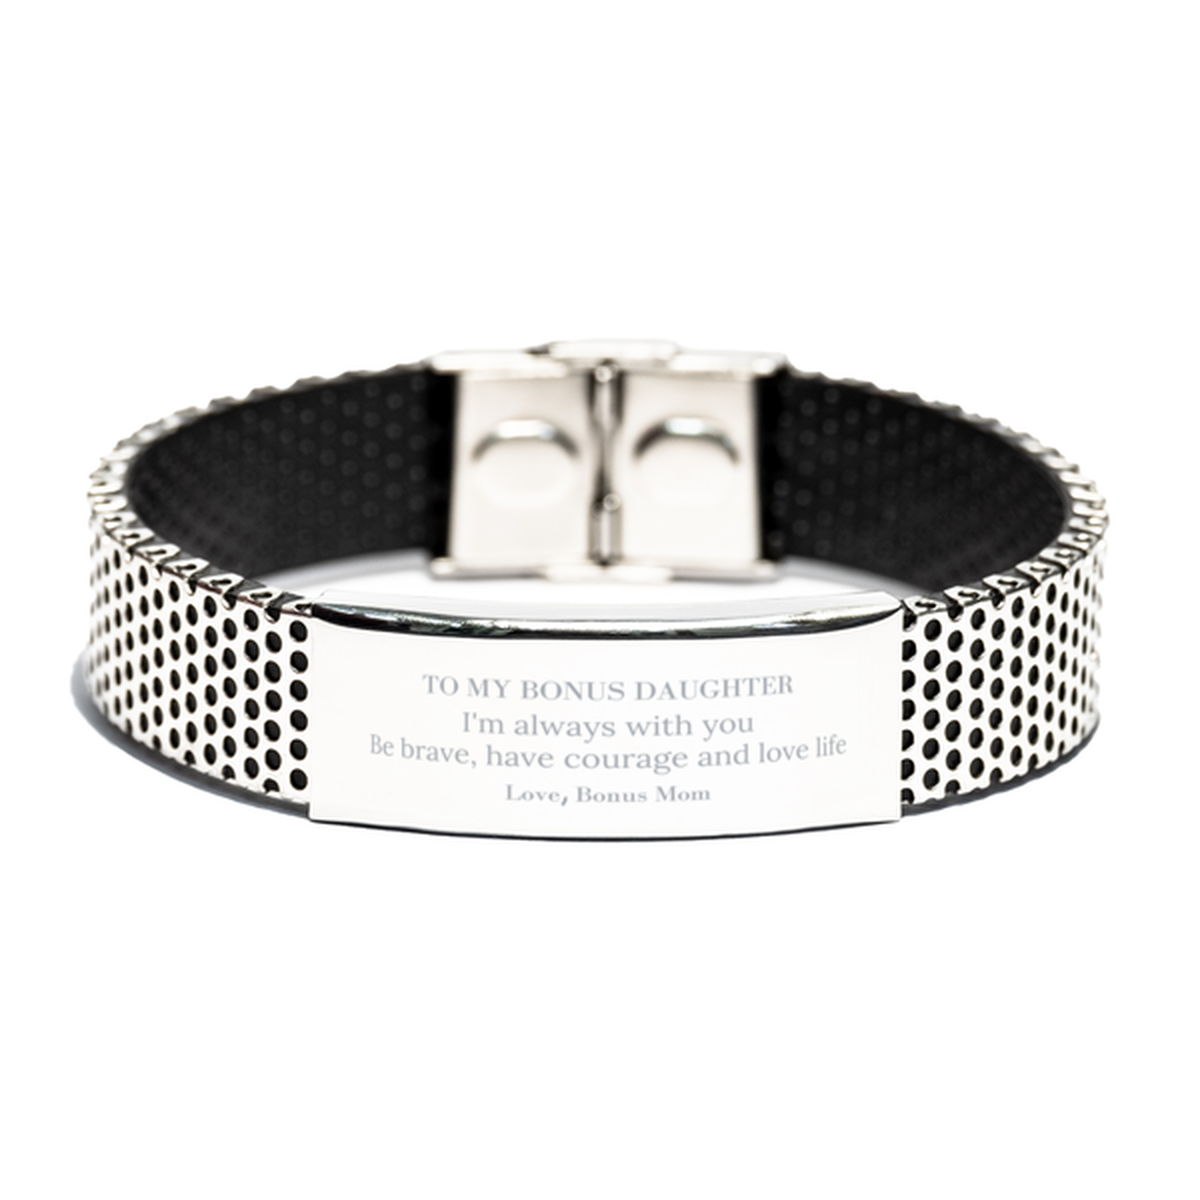 To My Bonus Daughter Gifts from Bonus Mom, Unique Stainless Steel Bracelet Inspirational Christmas Birthday Graduation Gifts for Bonus Daughter I'm always with you. Be brave, have courage and love life. Love, Bonus Mom